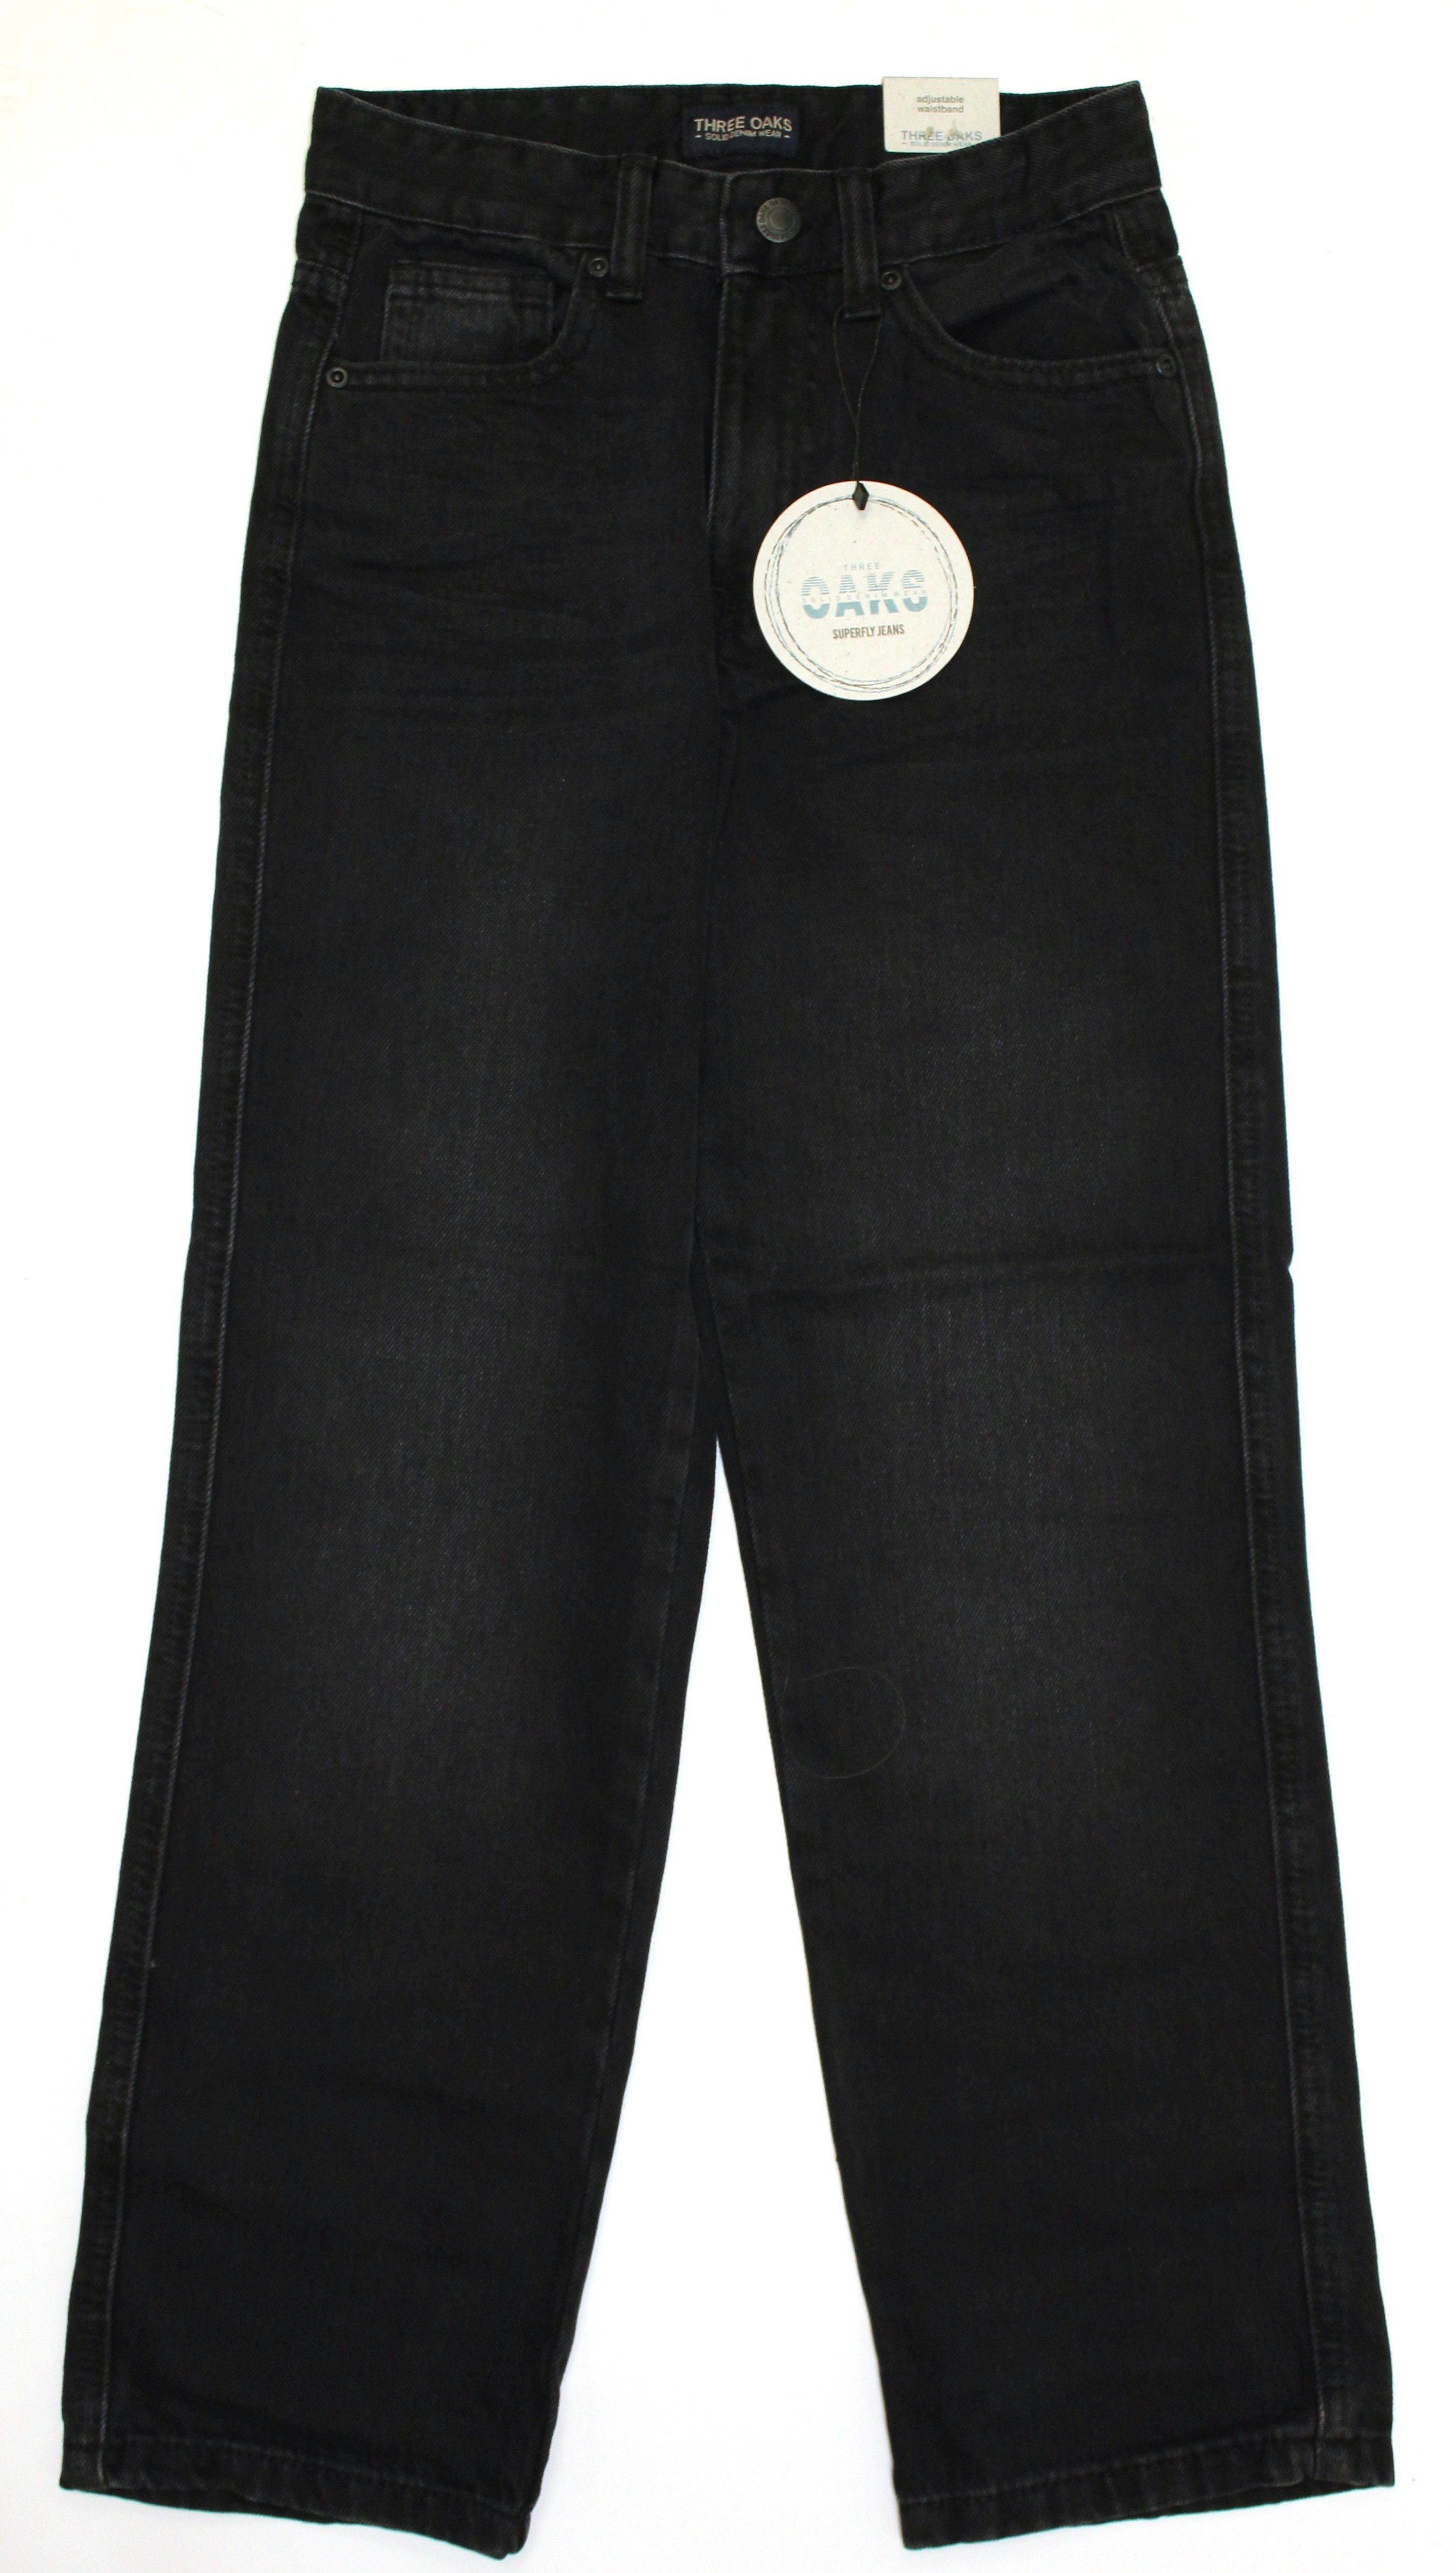 OAKS (1-tlg) Jeans Bequeme Black BAGGY-FIT-JEANS 390 THREE